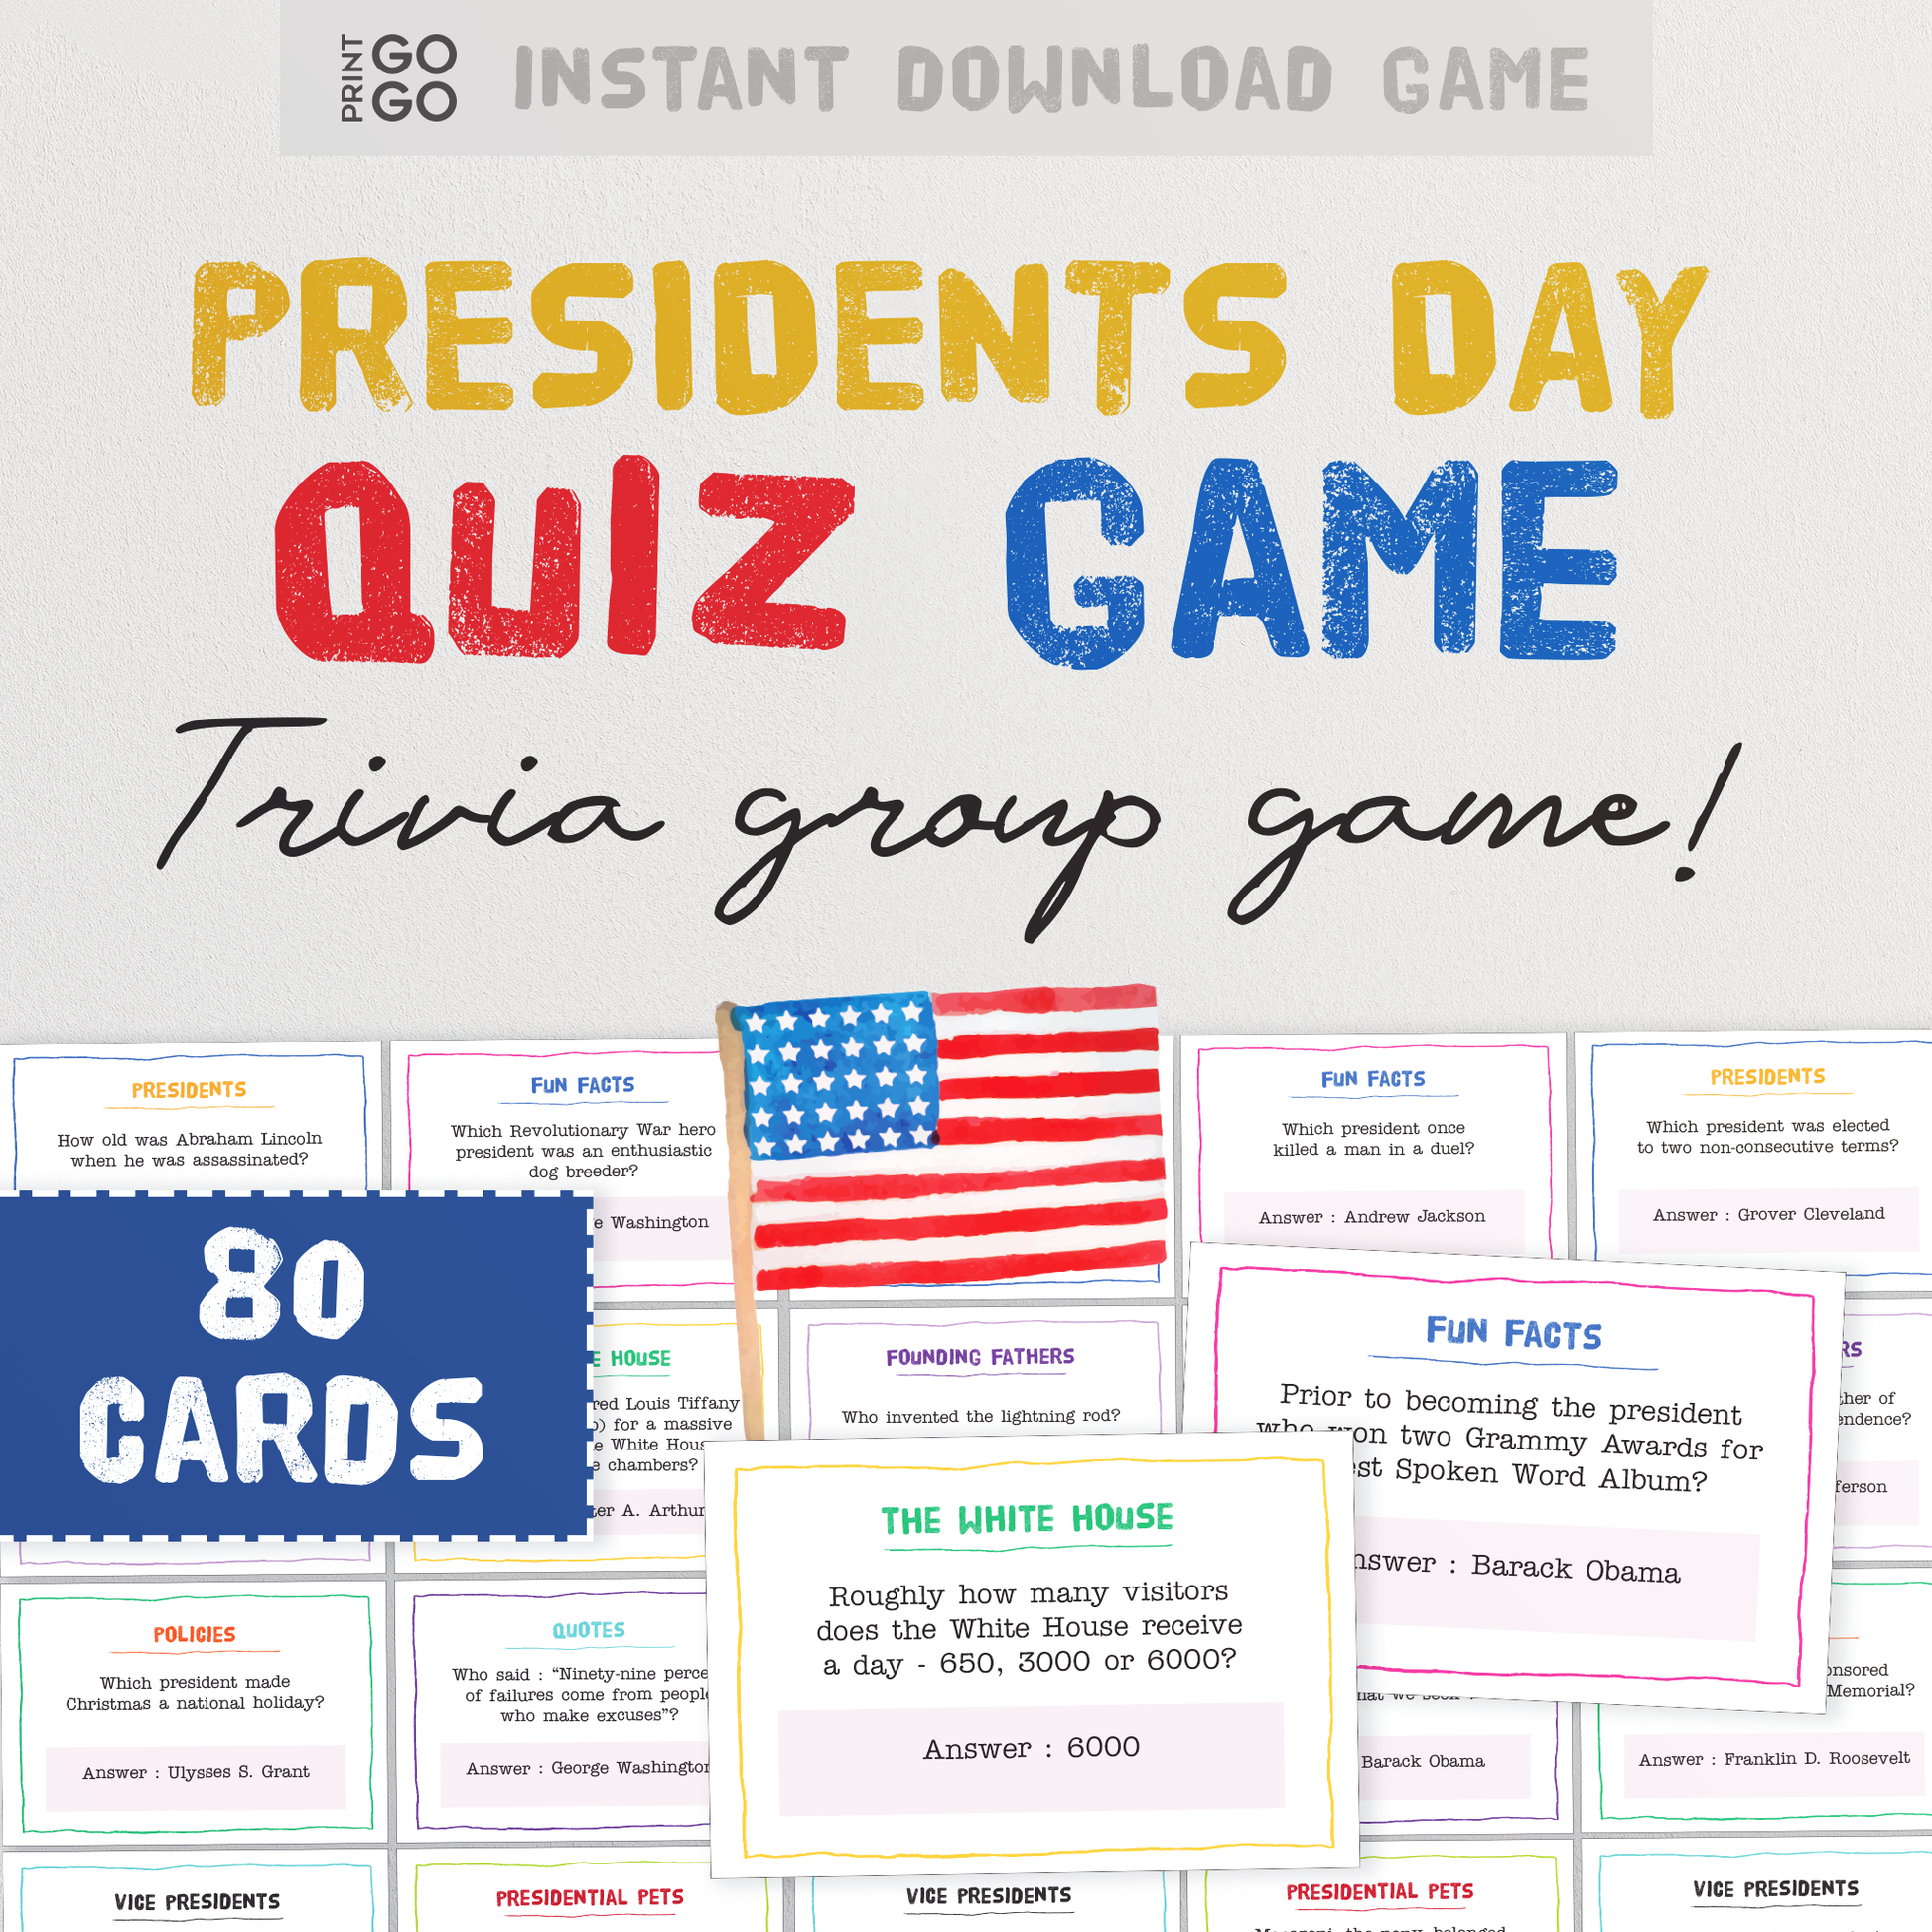 Presidents Day Quiz Game - The Fun Trivia Party Game for Groups